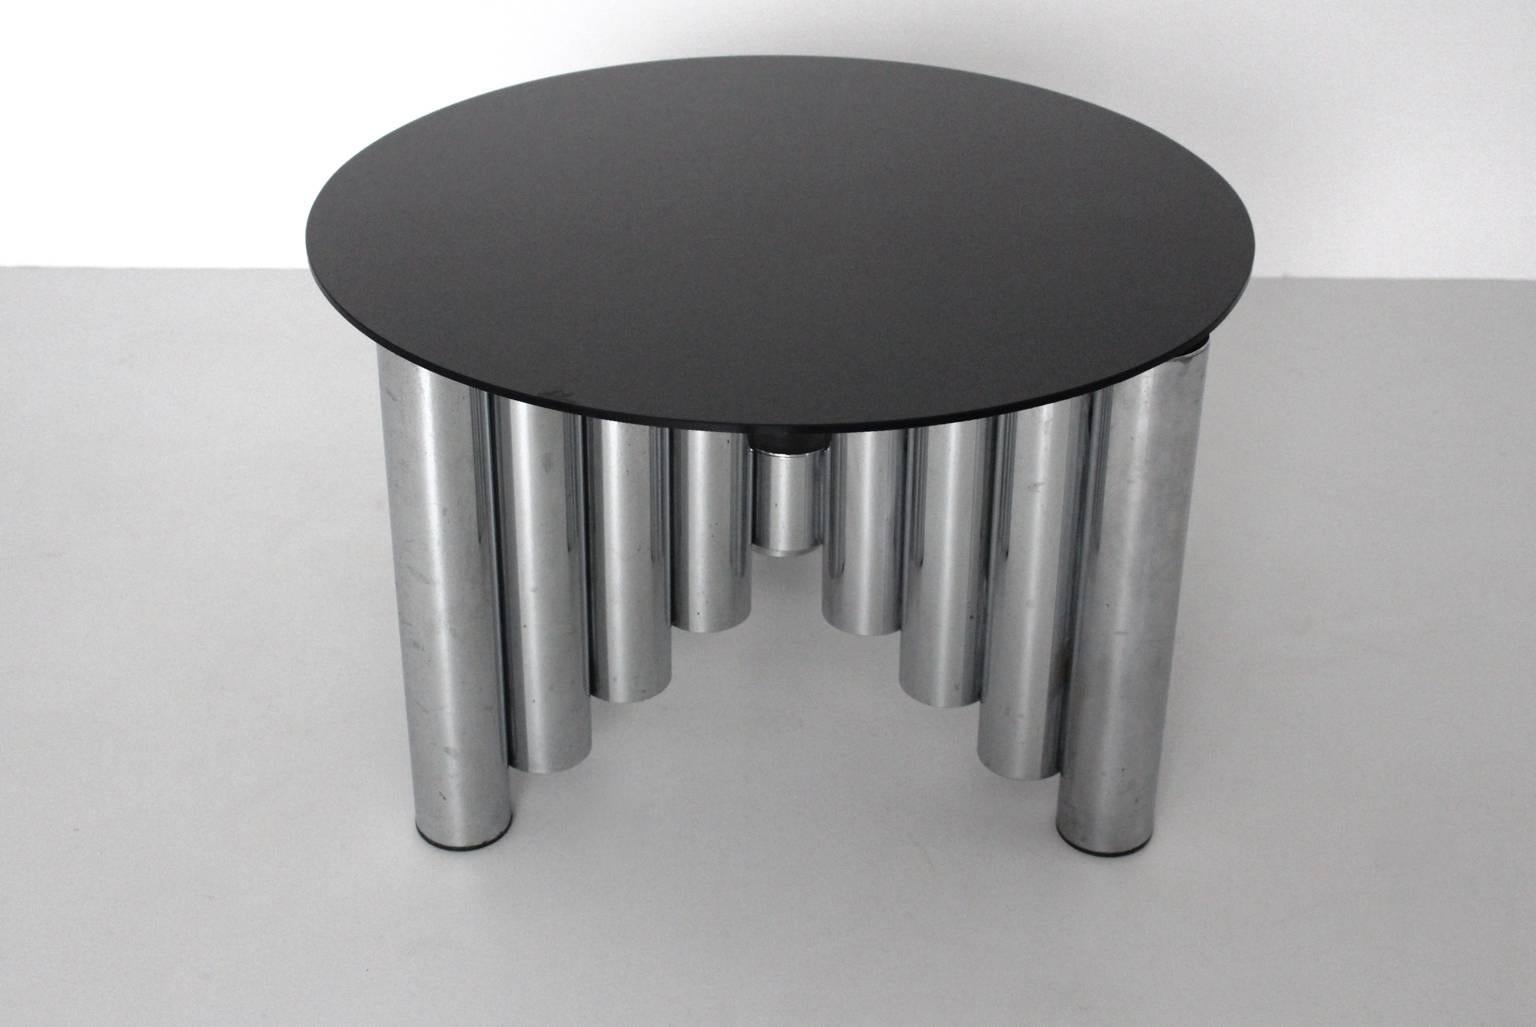 Mid Century Modern vintage coffee table or sofa table with a chromed base and a black colored glass top.
While the chromed tube steel base shows good condition with signs of age, the black glass top has fine scratches.

All measures are